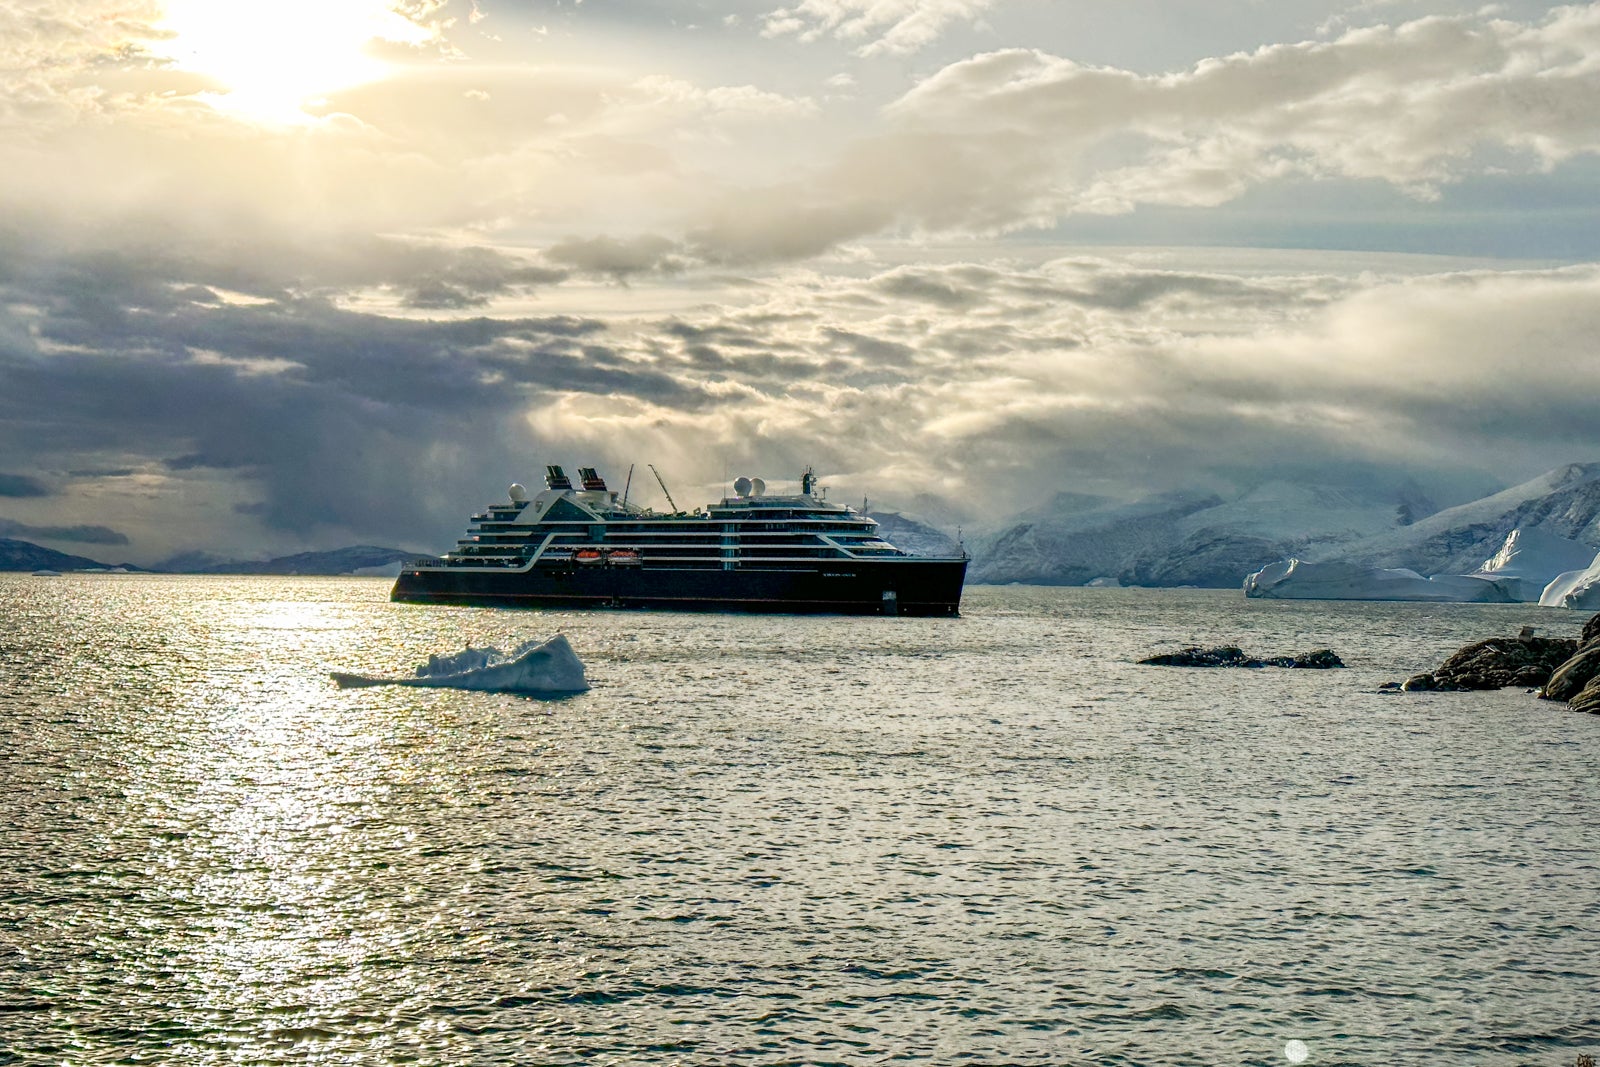 Seabourn Venture anchored with sun breaking through the clouds behind it and icebergs floating in front